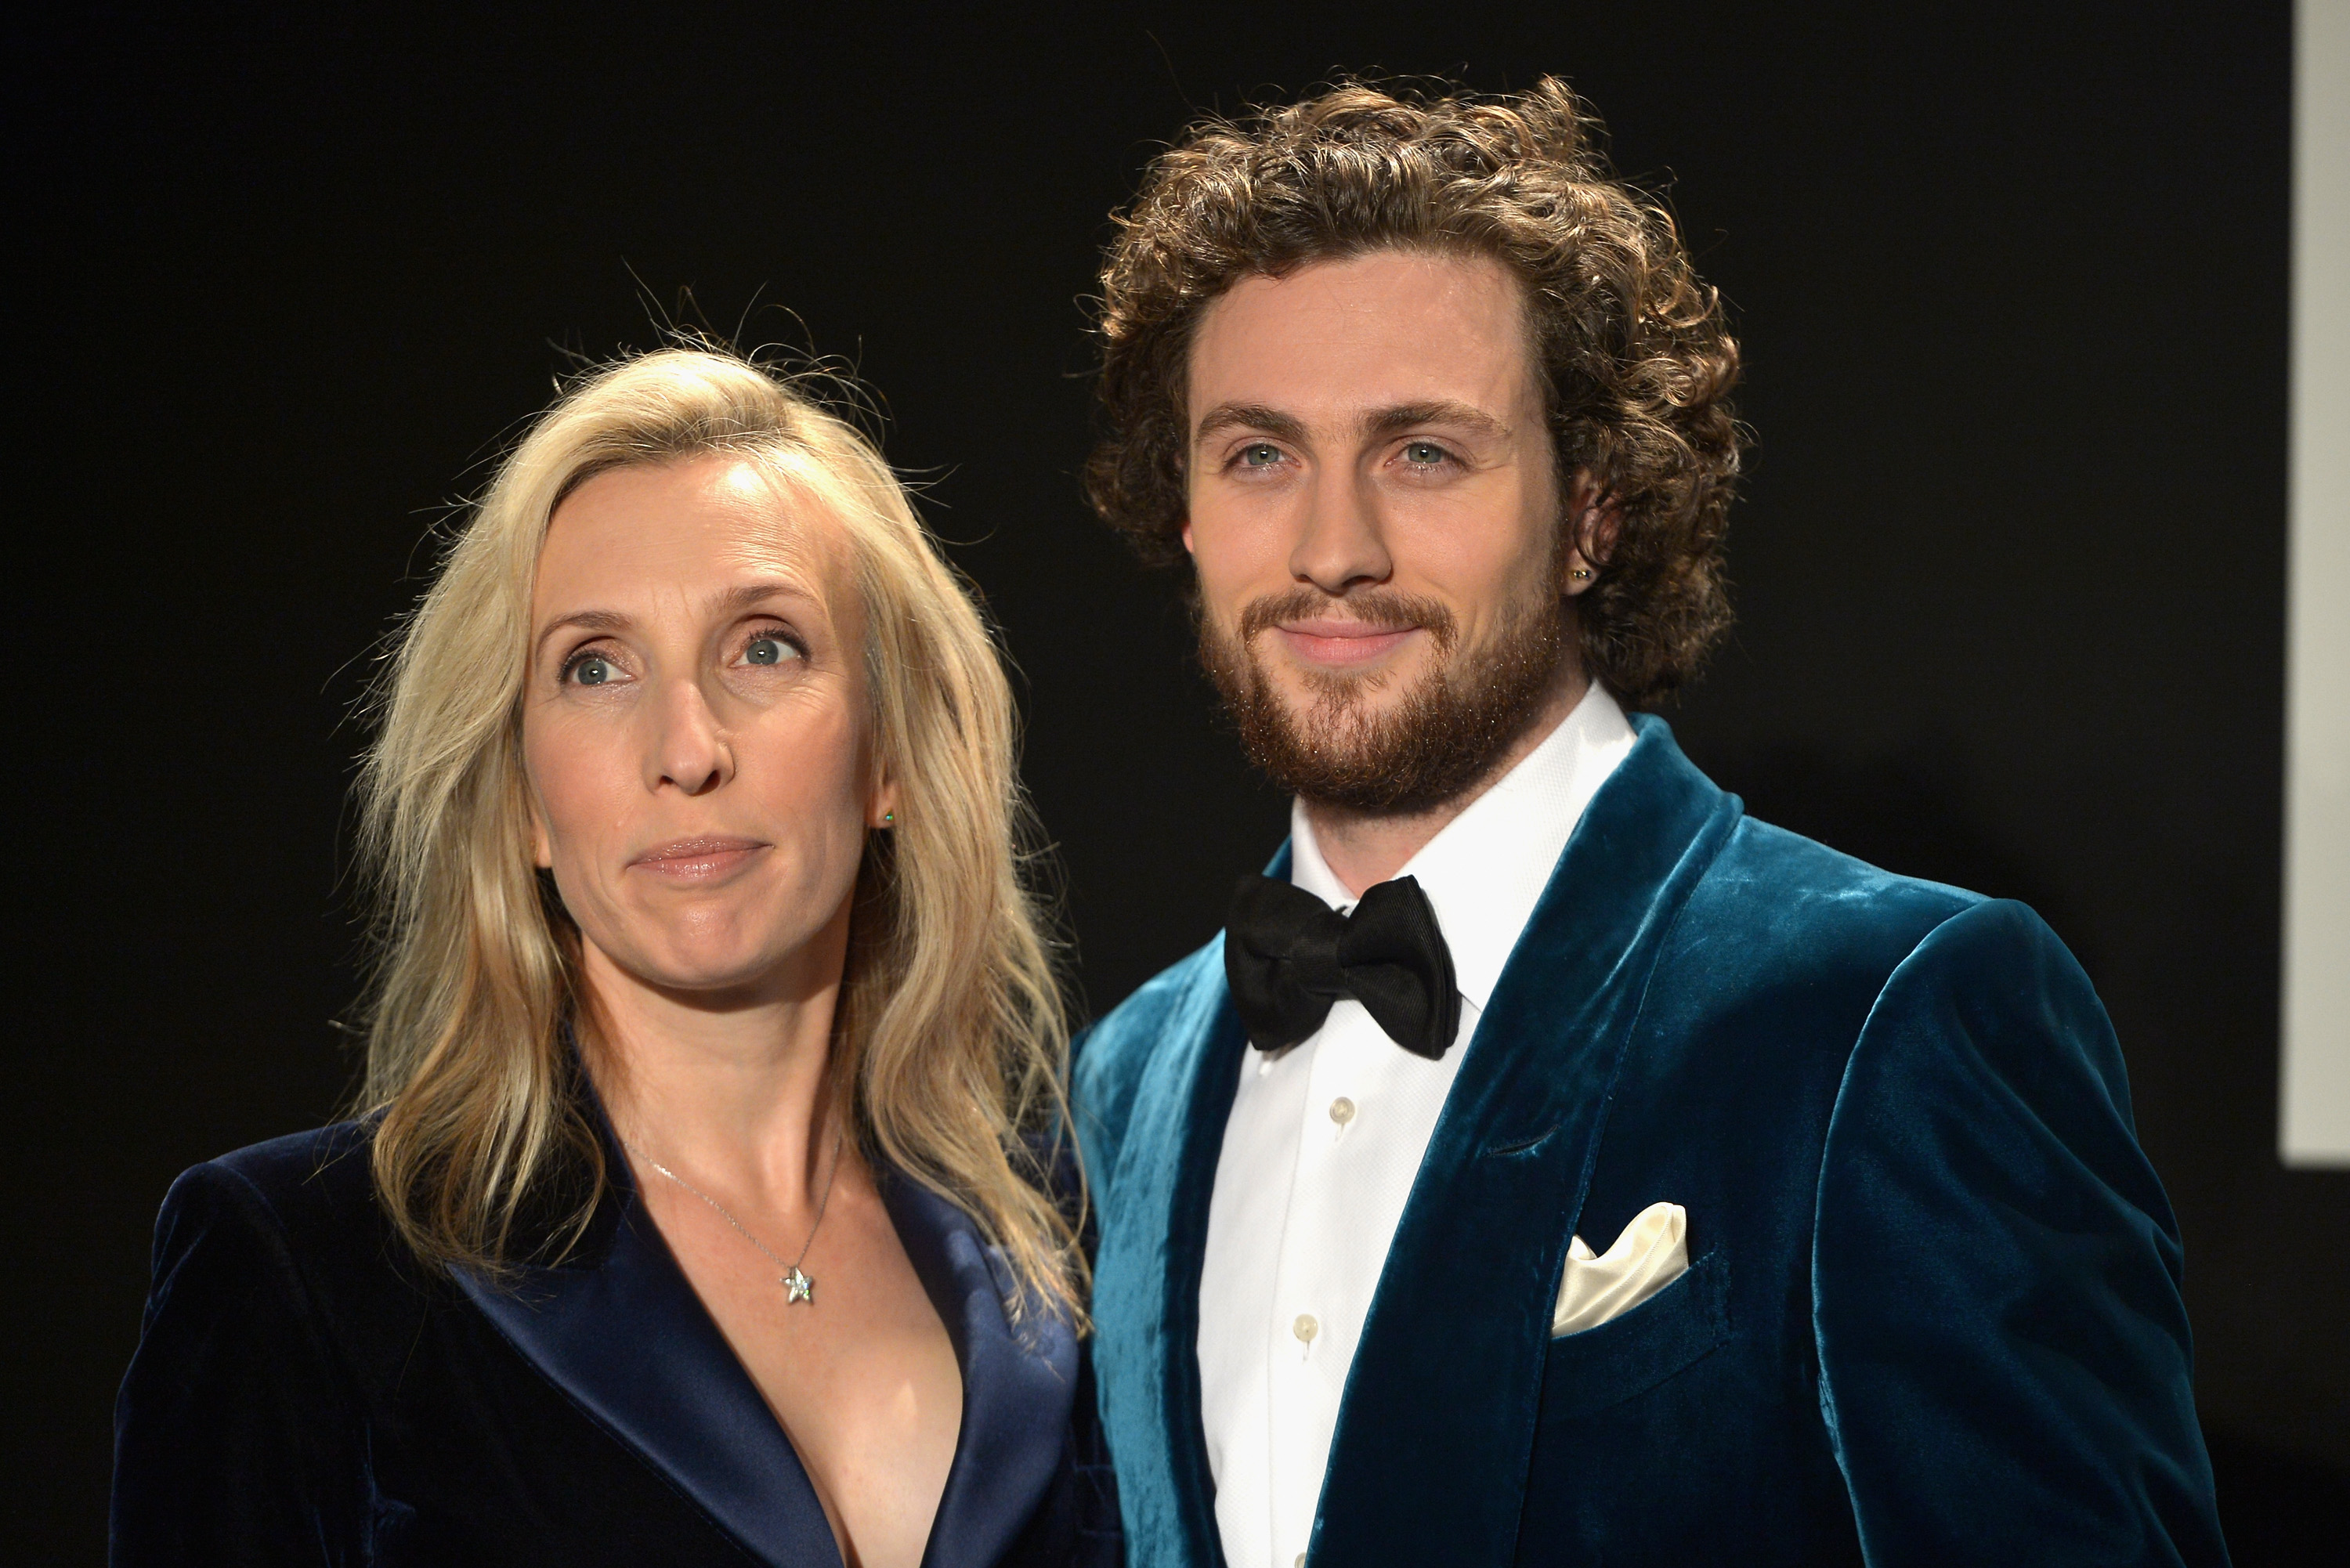 LOS ANGELES, CA - FEBRUARY 20: Director Sam Taylor-Johnson (L) and actor Aaron Taylor-Johnson, both wearing TOM FORD, attend the TOM FORD Autumn/Winter 2015 Womenswear Collection Presentation at Milk Studios in Los Angeles on February 20, 2015. (Photo by Charley Gallay/Getty Images for Tom Ford)